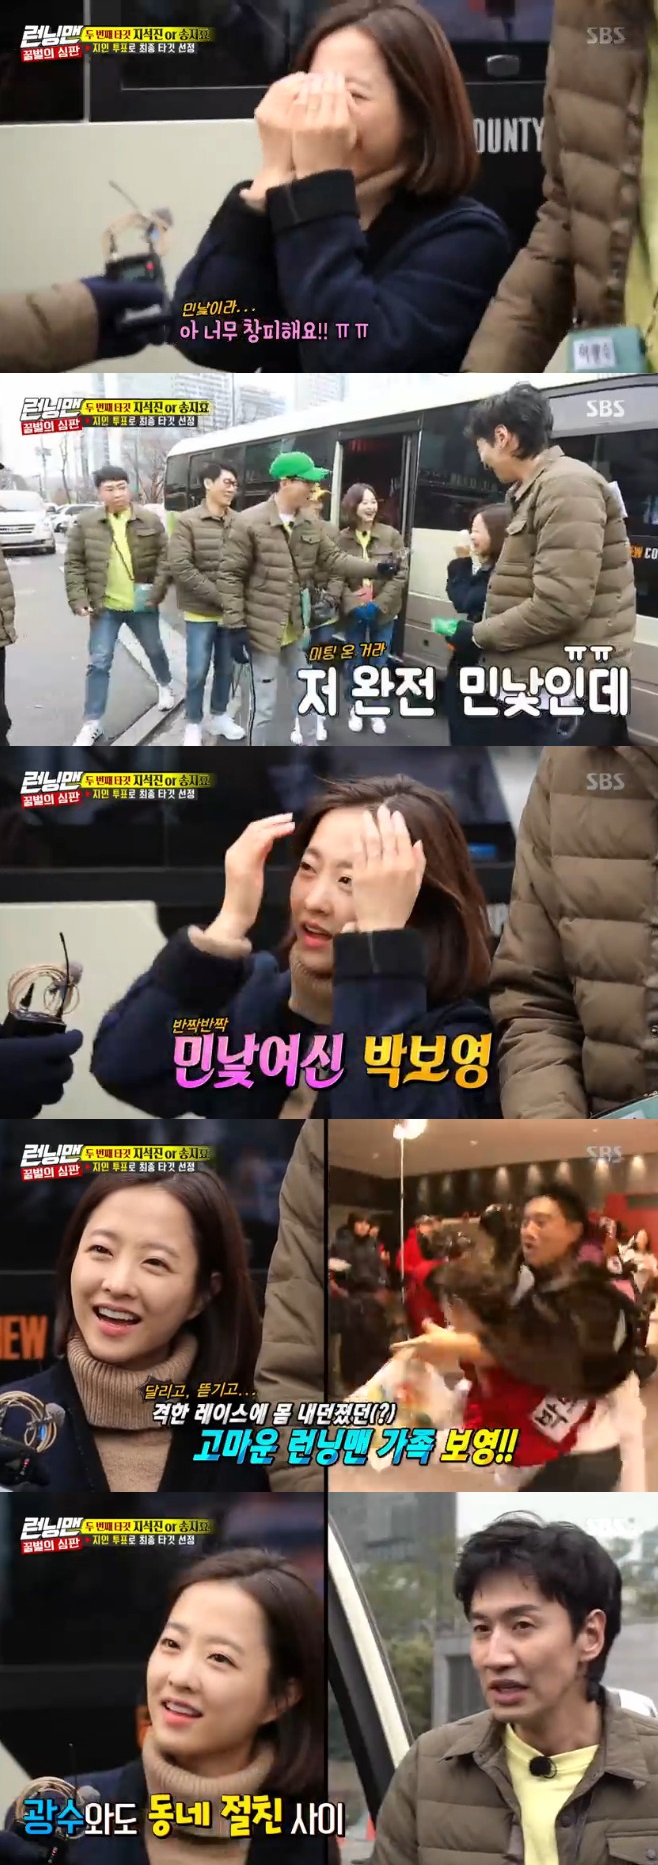 Actor Park Bo-young made a surprise appearance in Running Man.The SBS entertainment program Running Man, which was broadcasted on the afternoon of the 3rd, was decorated with bee referee.On this day, we voted for several stars to select the dropouts of Ji Seok Jin and Song Ji Hyo.Park Bo-young, who happened to meet with the Running Man team and attracted attention. Park Bo-young, who appeared in a surprise without makeup, was ashamed that he was too embarrassed.Lee Kwang-soo, who lives in the same neighborhood as Park Bo-young, said, We are like a family.Park Bo-young expressed his special feelings about Song Ji-hyo during Song Ji-hyo and Ji Suk-jin. Park Bo-young expressed his affection, saying, I can not forget that I hugged me when I appeared in Running Man before.In the end, Park Bo-young pointed out Ji Suk-jin as a dropout and gave a smile.